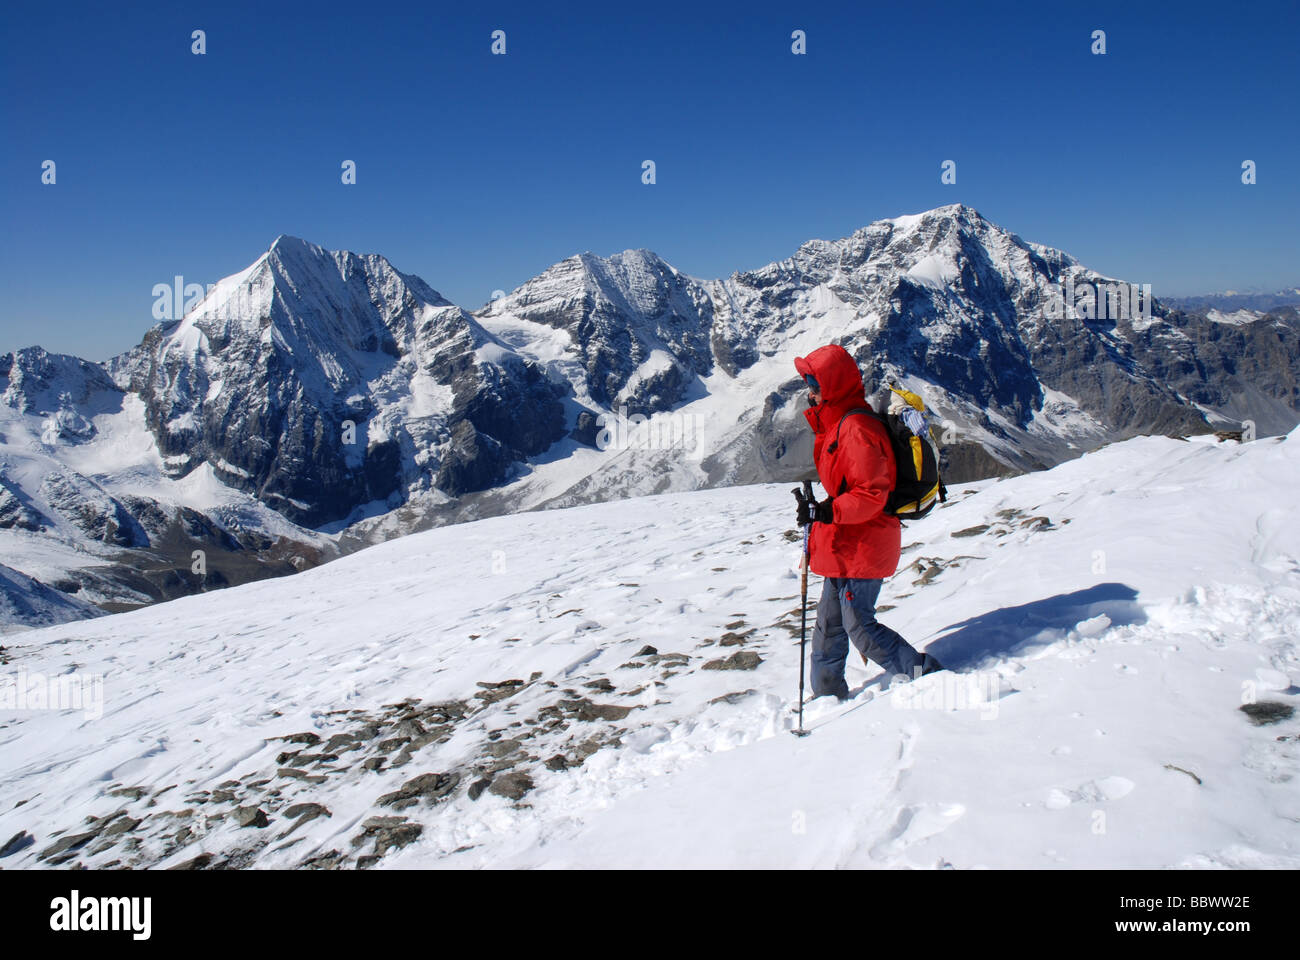 Madritschjoch Königsspitze and Ortler Alto Adige, Italy Stock Photo - Alamy